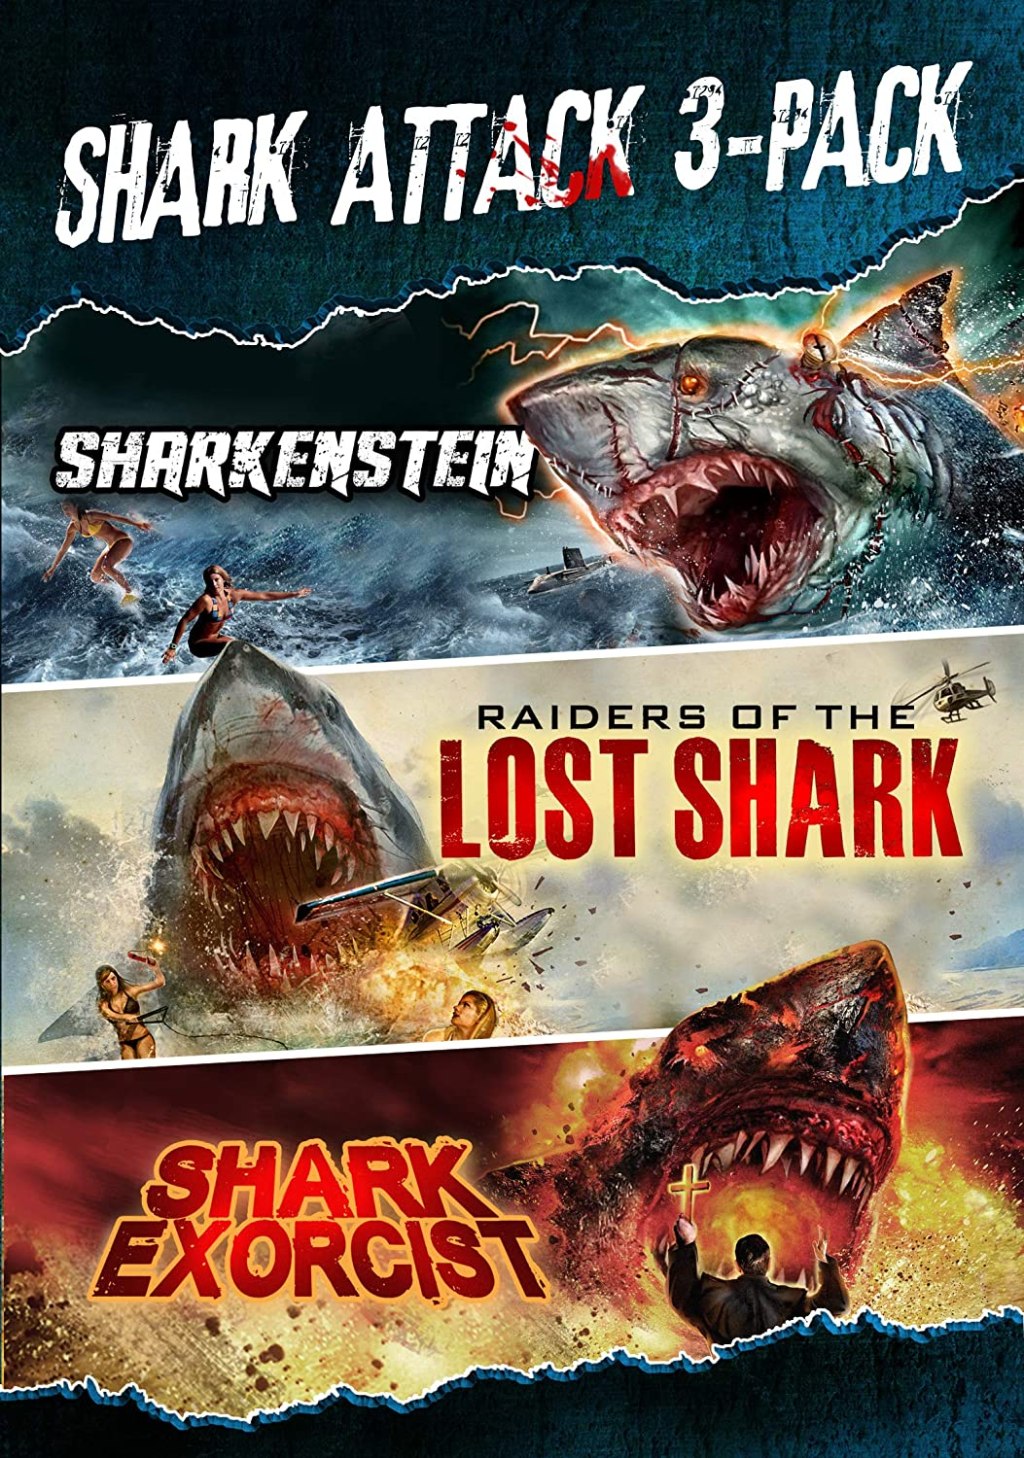 Shark Attack 3-Pack and the Music of Kevin MacLeod